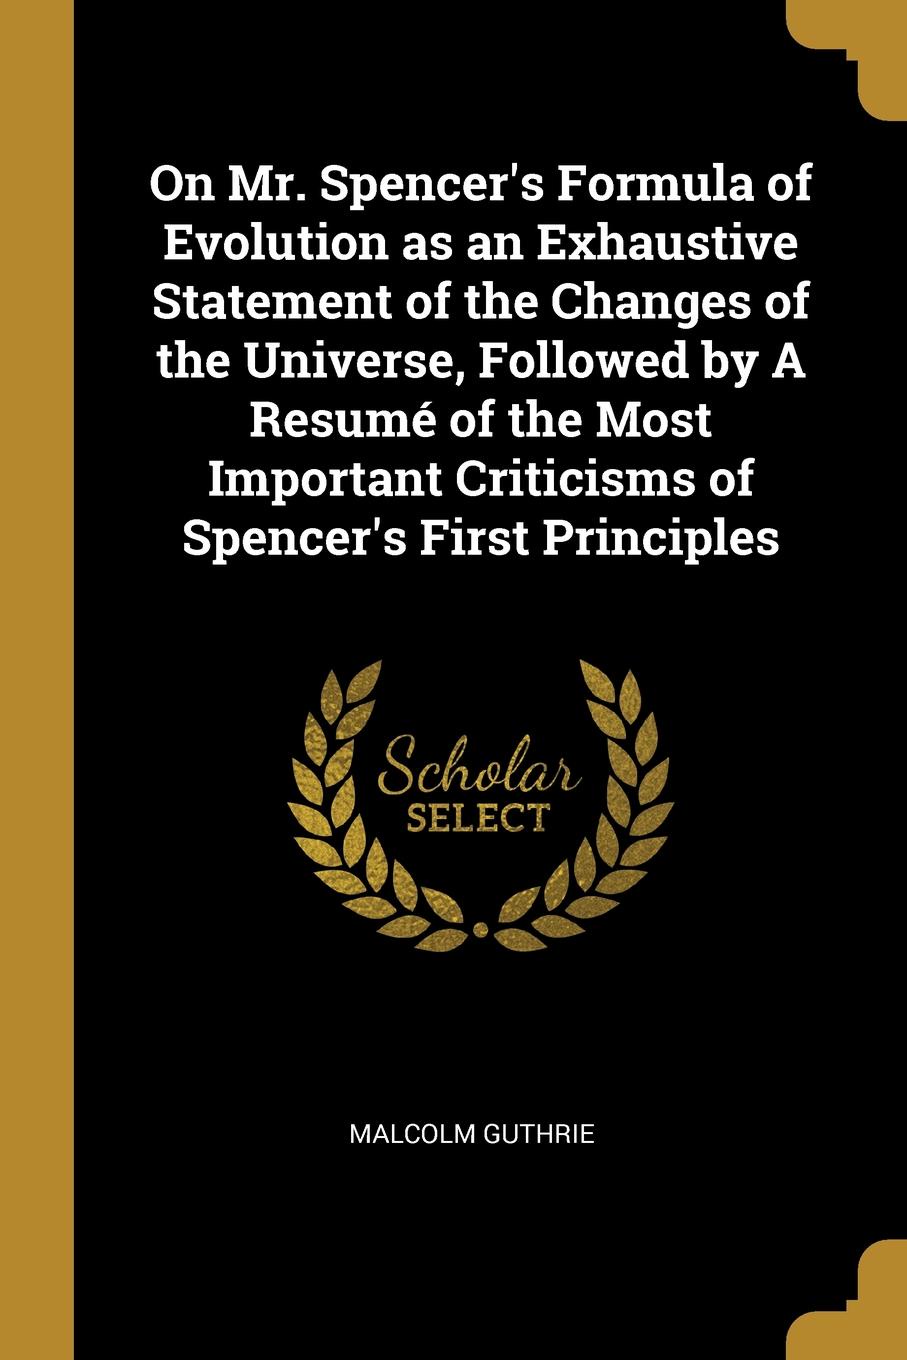 On Mr. Spencer.s Formula of Evolution as an Exhaustive Statement of the Changes of the Universe, Followed by A Resume of the Most Important Criticisms of Spencer.s First Principles